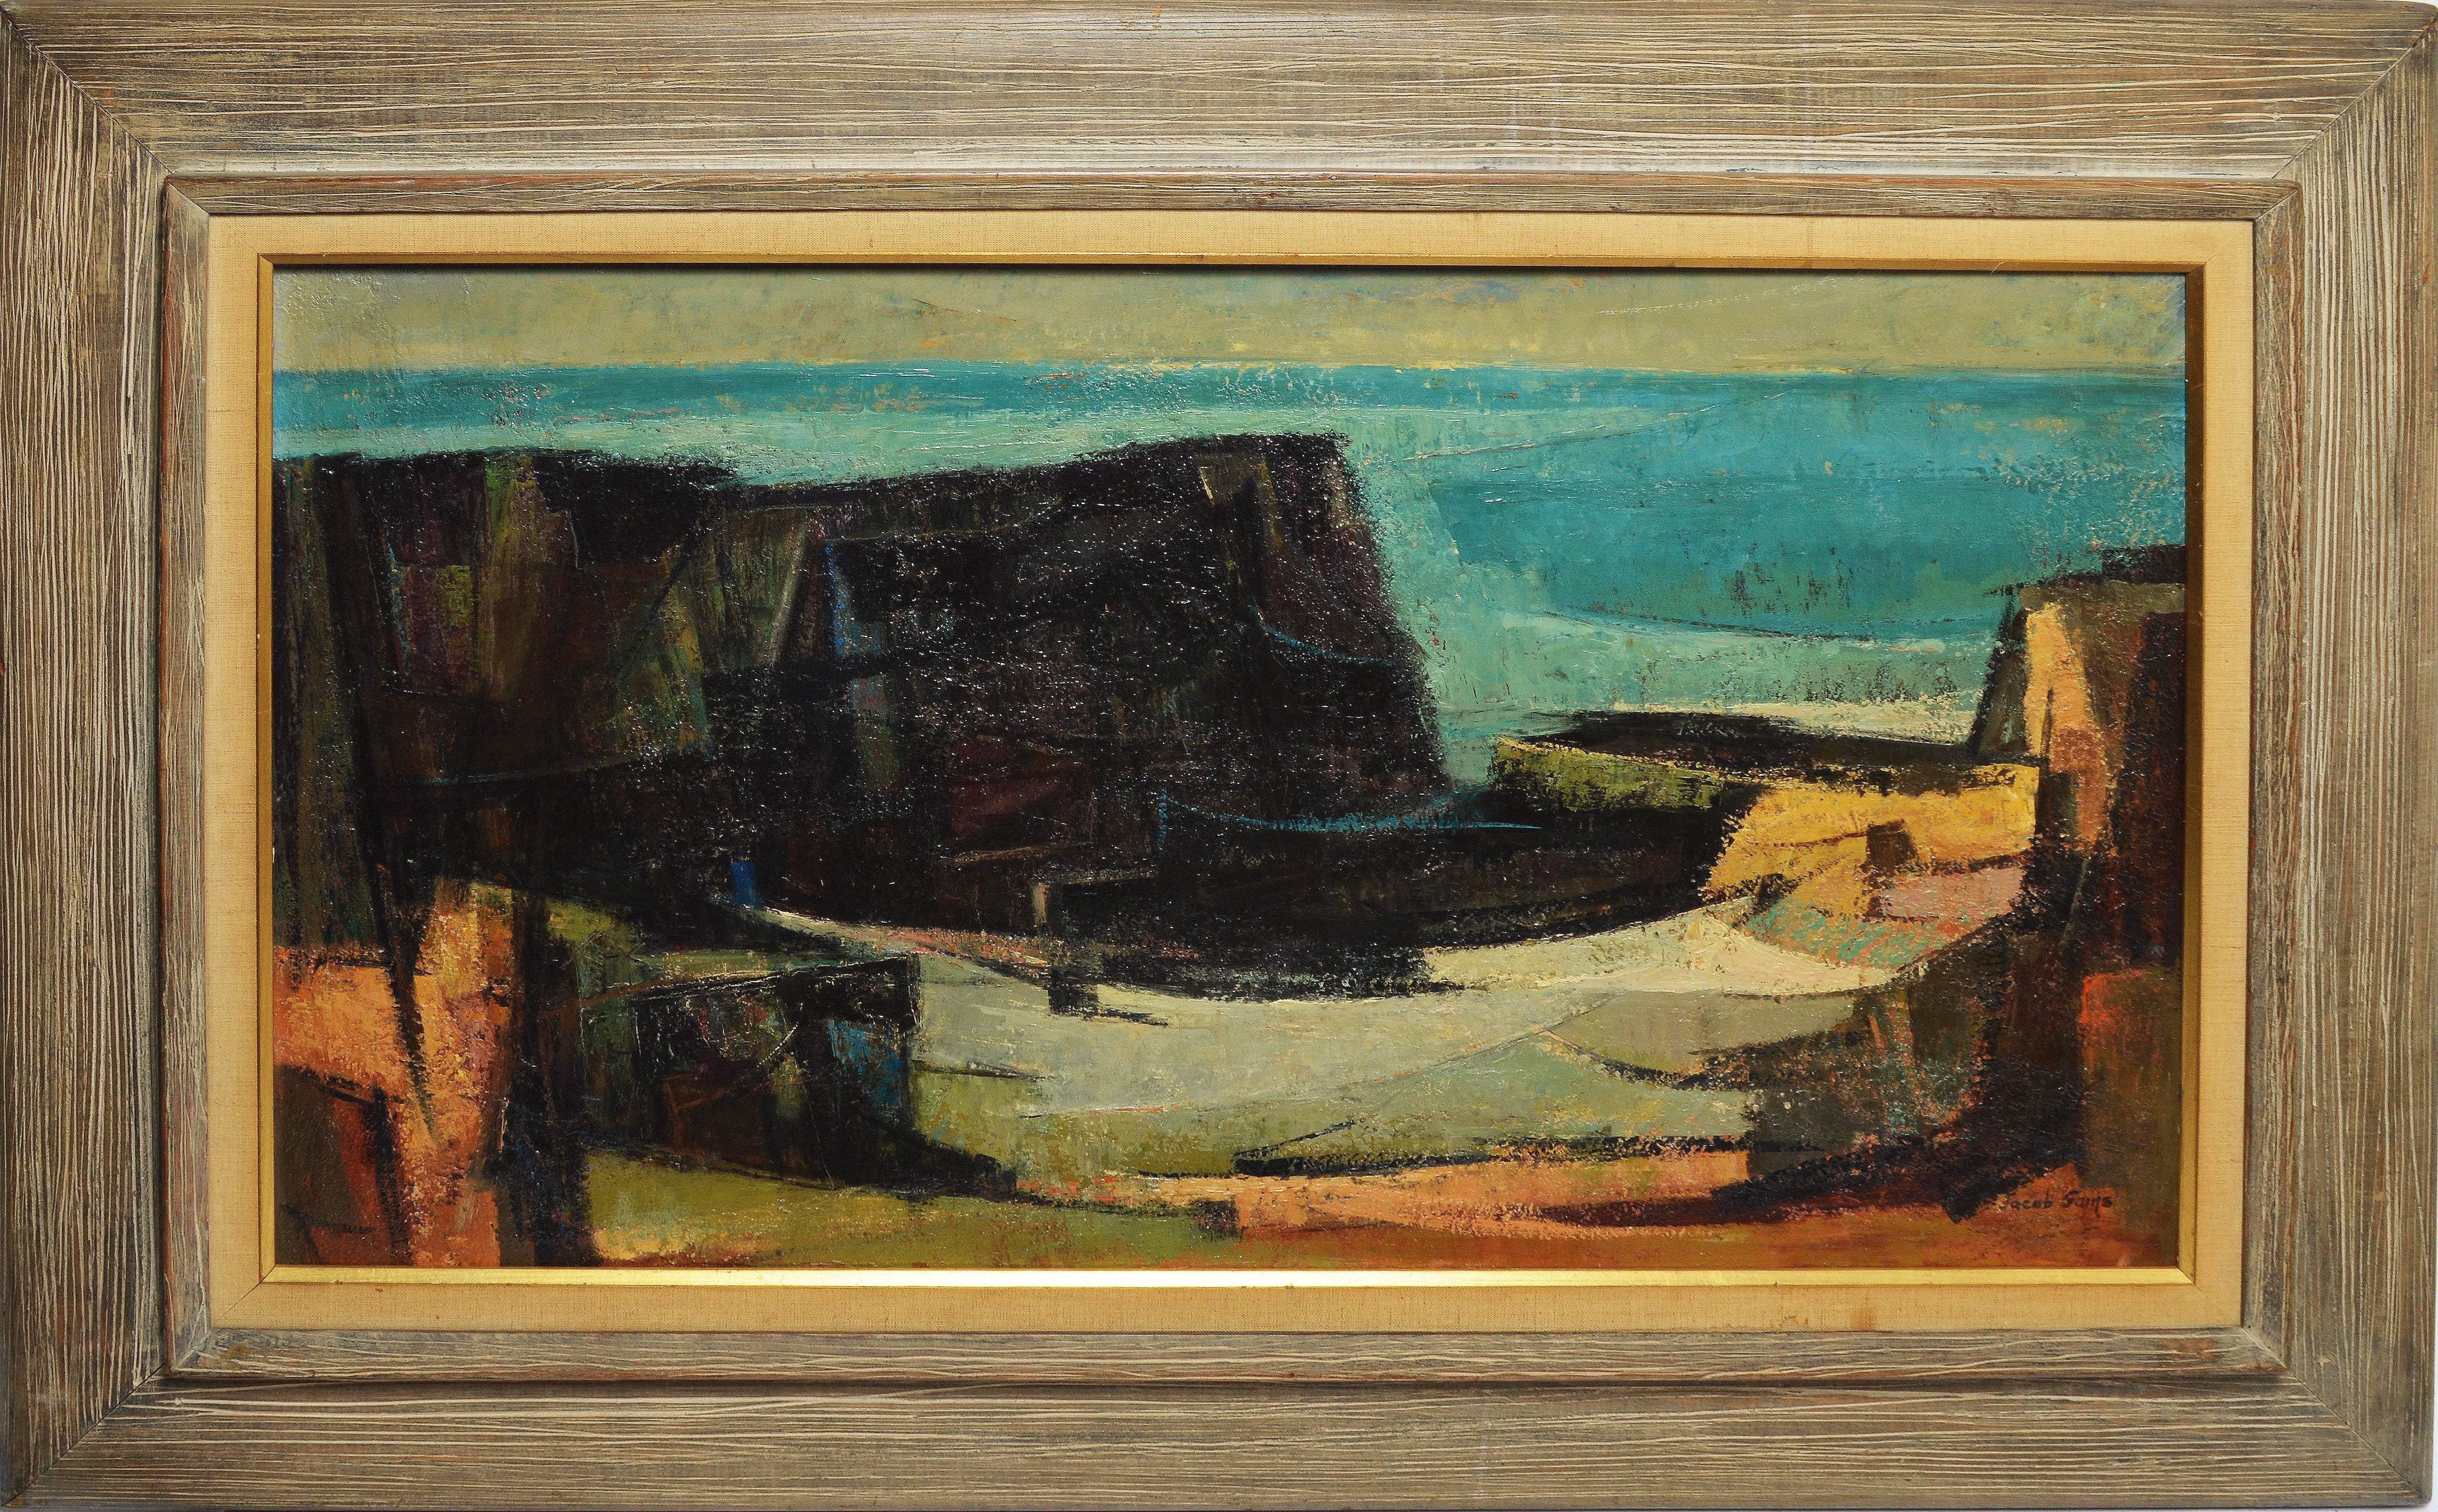 Modernist New England coastal view by Jacob Gains  (born 1907).  Oil on board, circa 1940.  Signed lower right.  Displayed in a period modernist frame.  Image size, 35"L  21"H, overall 43"L x 29"H.